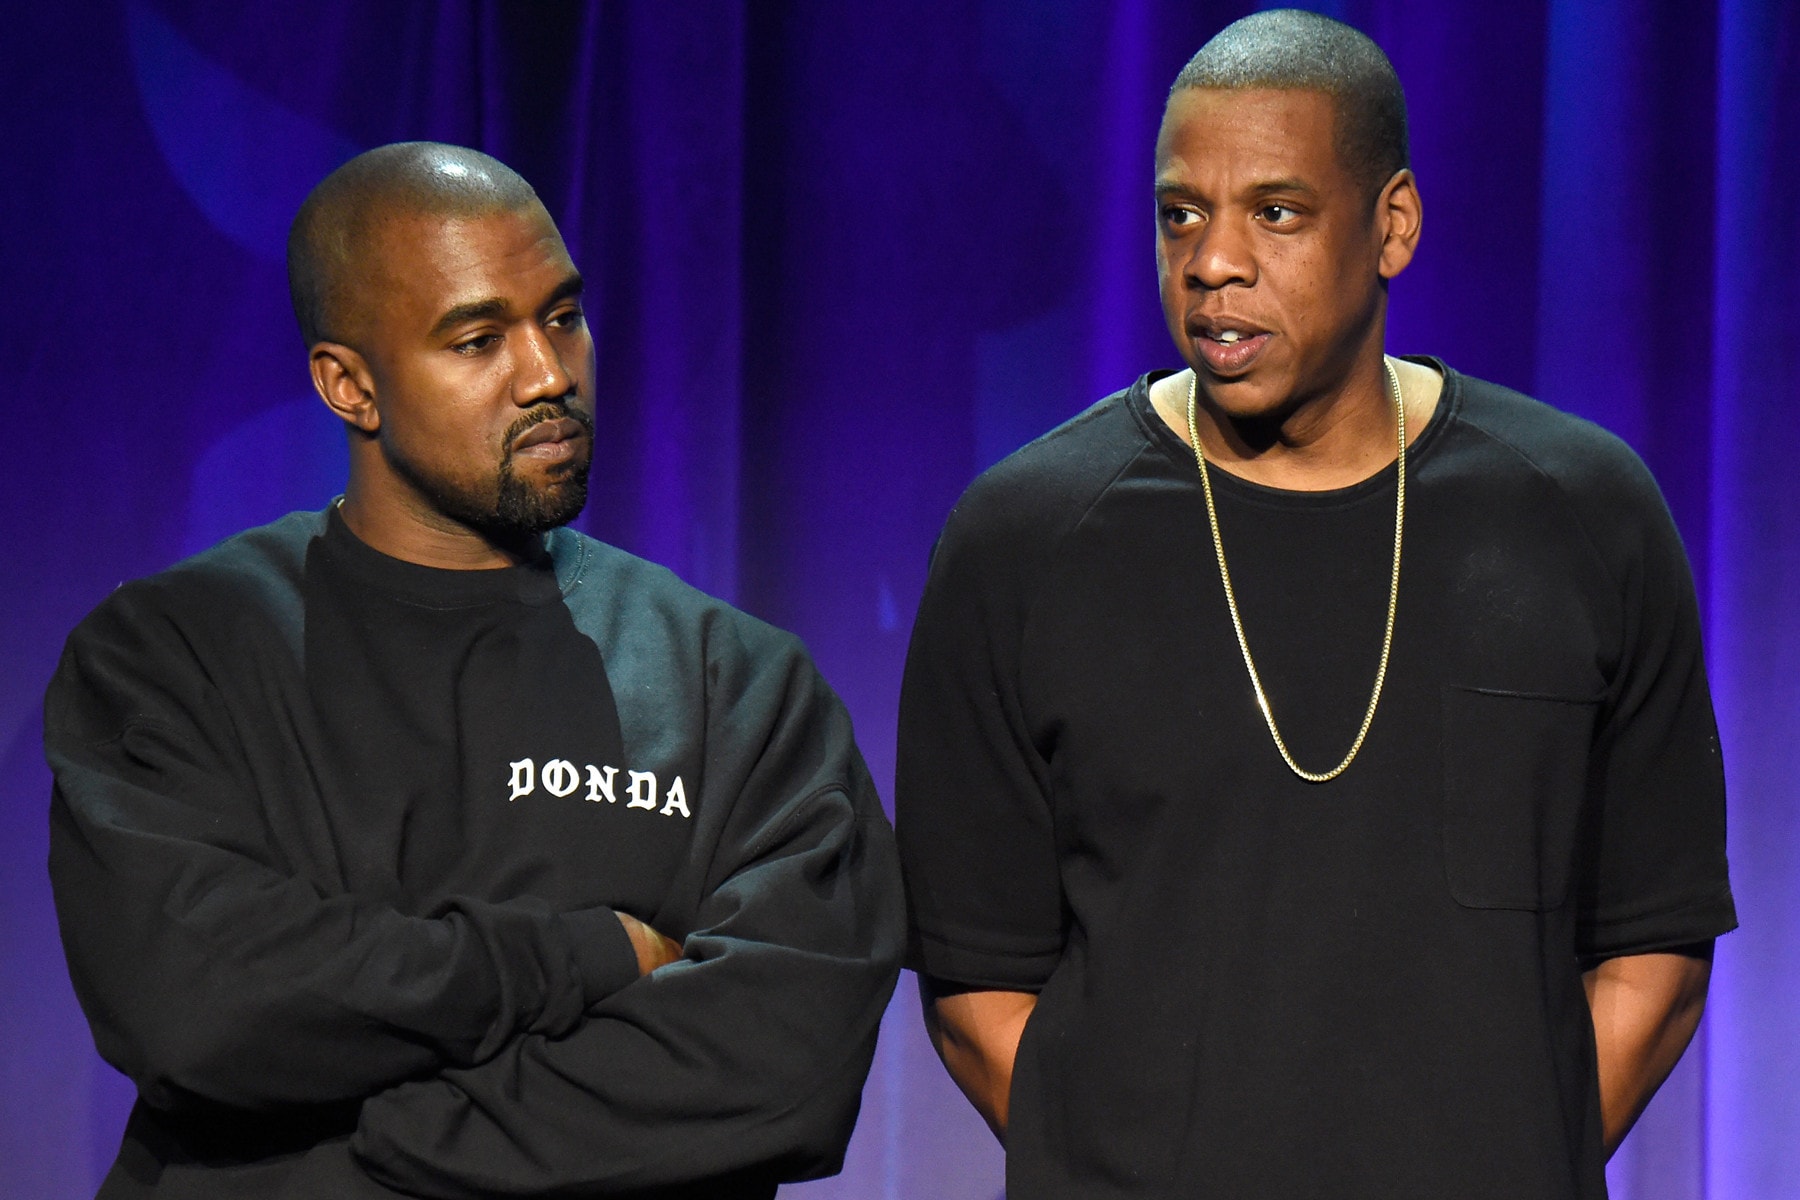 Kanye West JAY-Z Watch the Throne 2 Tease Release Info What's Free Meek Mill Championships